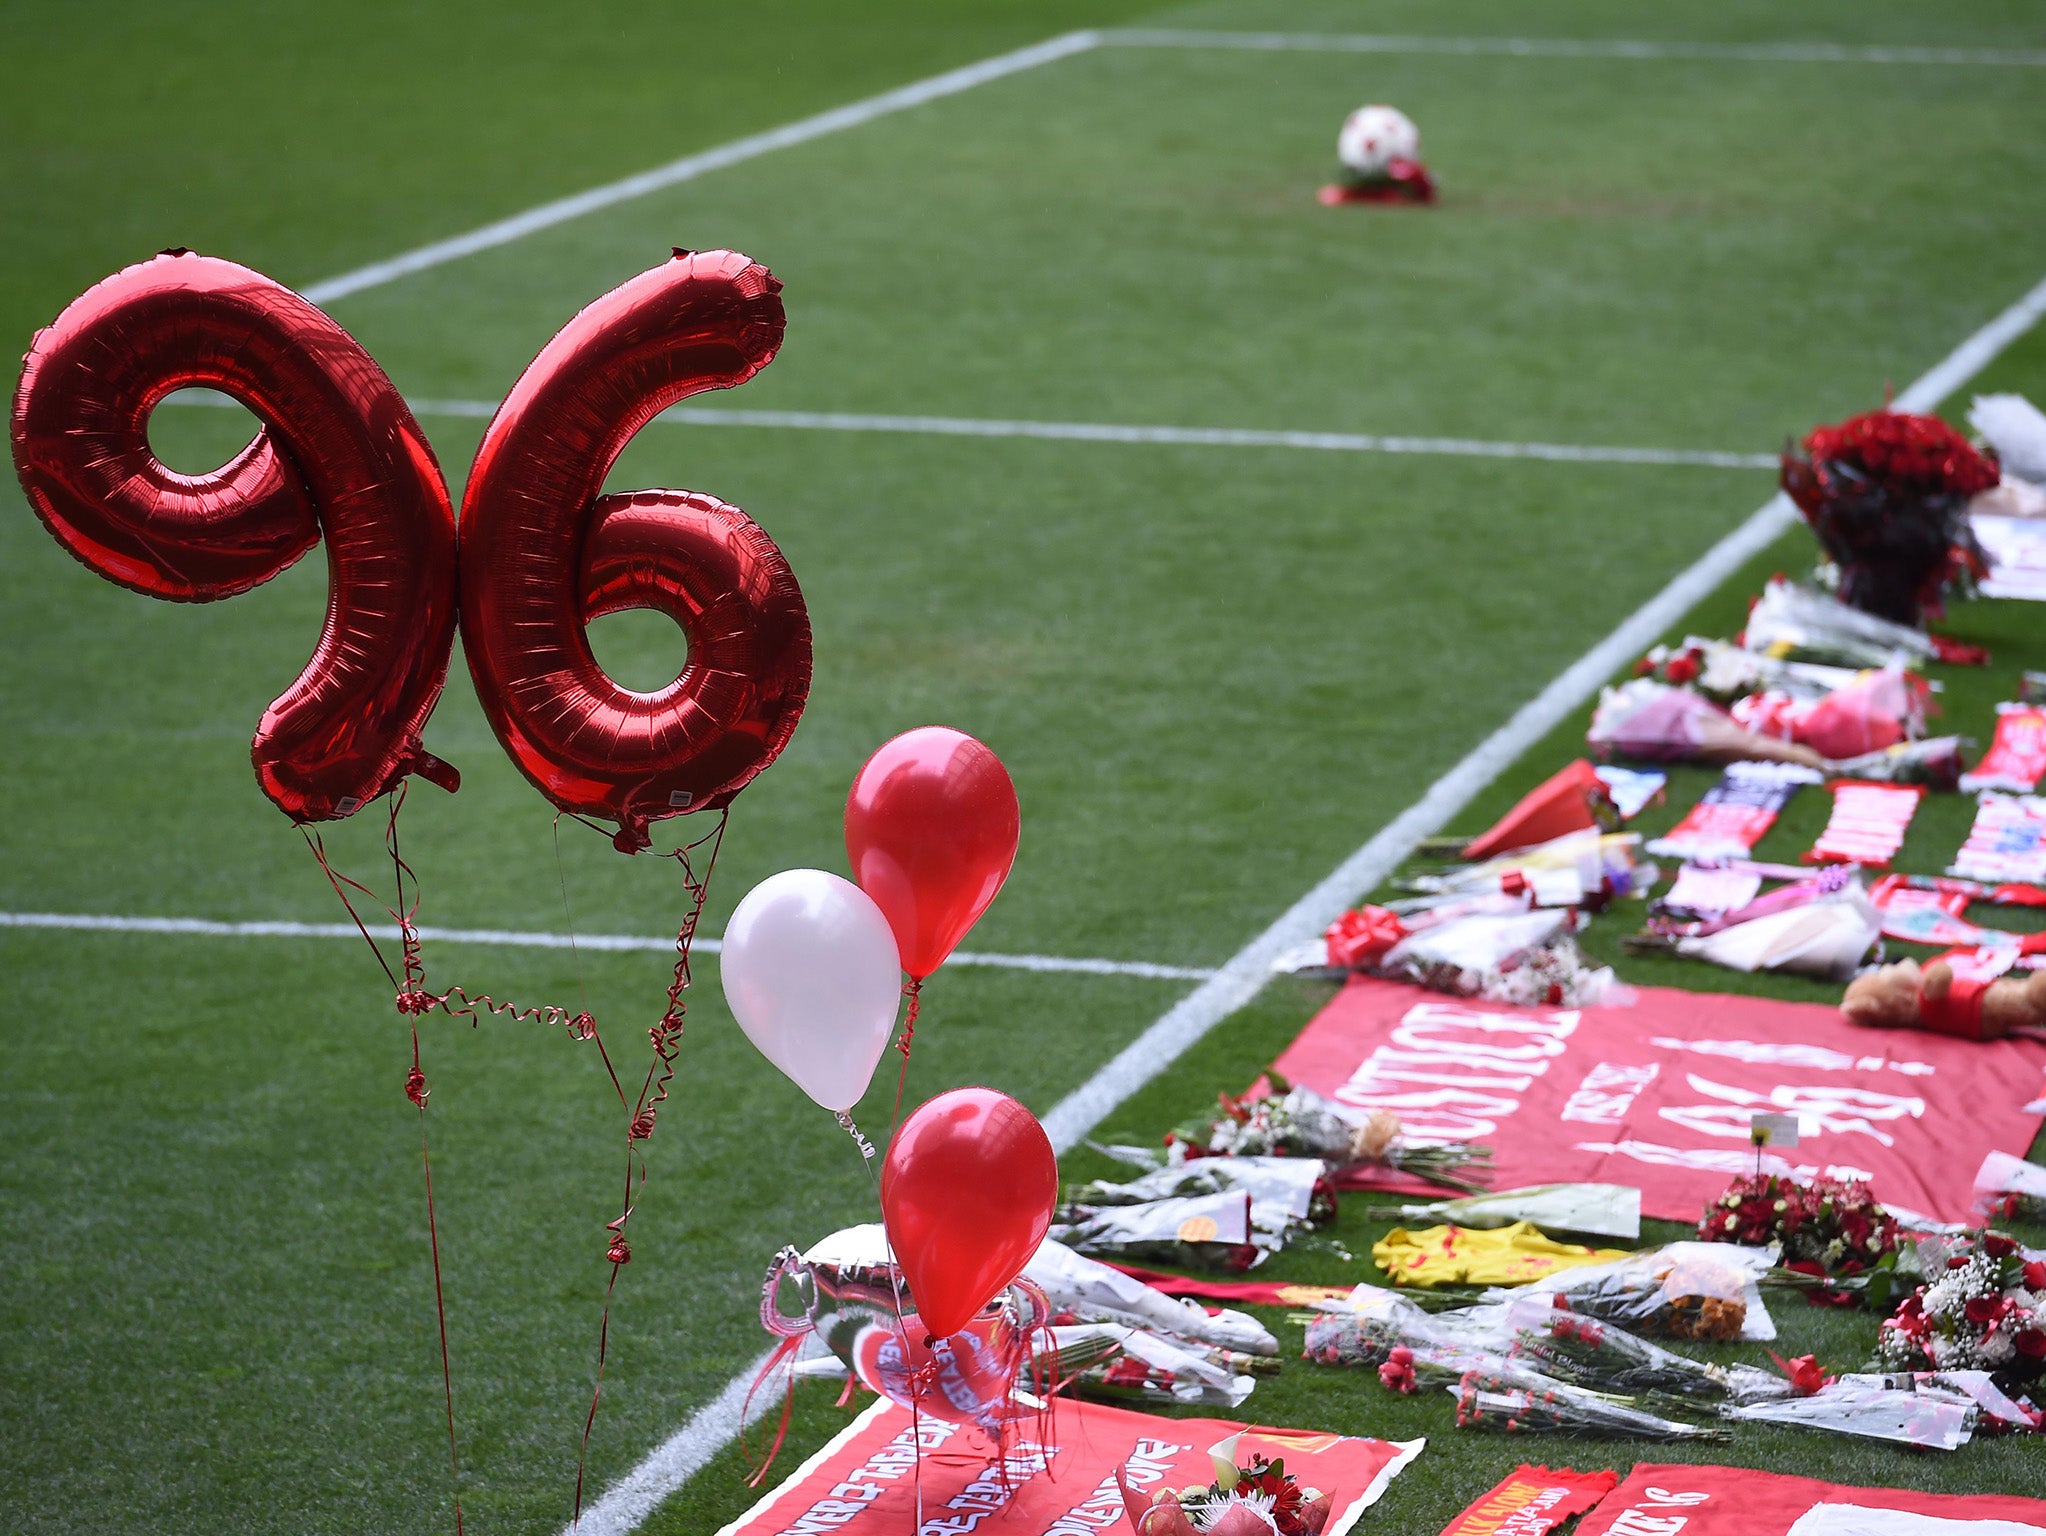 Balloons make the number '96' during a memorial service at Anfield in Liverpool, north west England on April 15, 2016